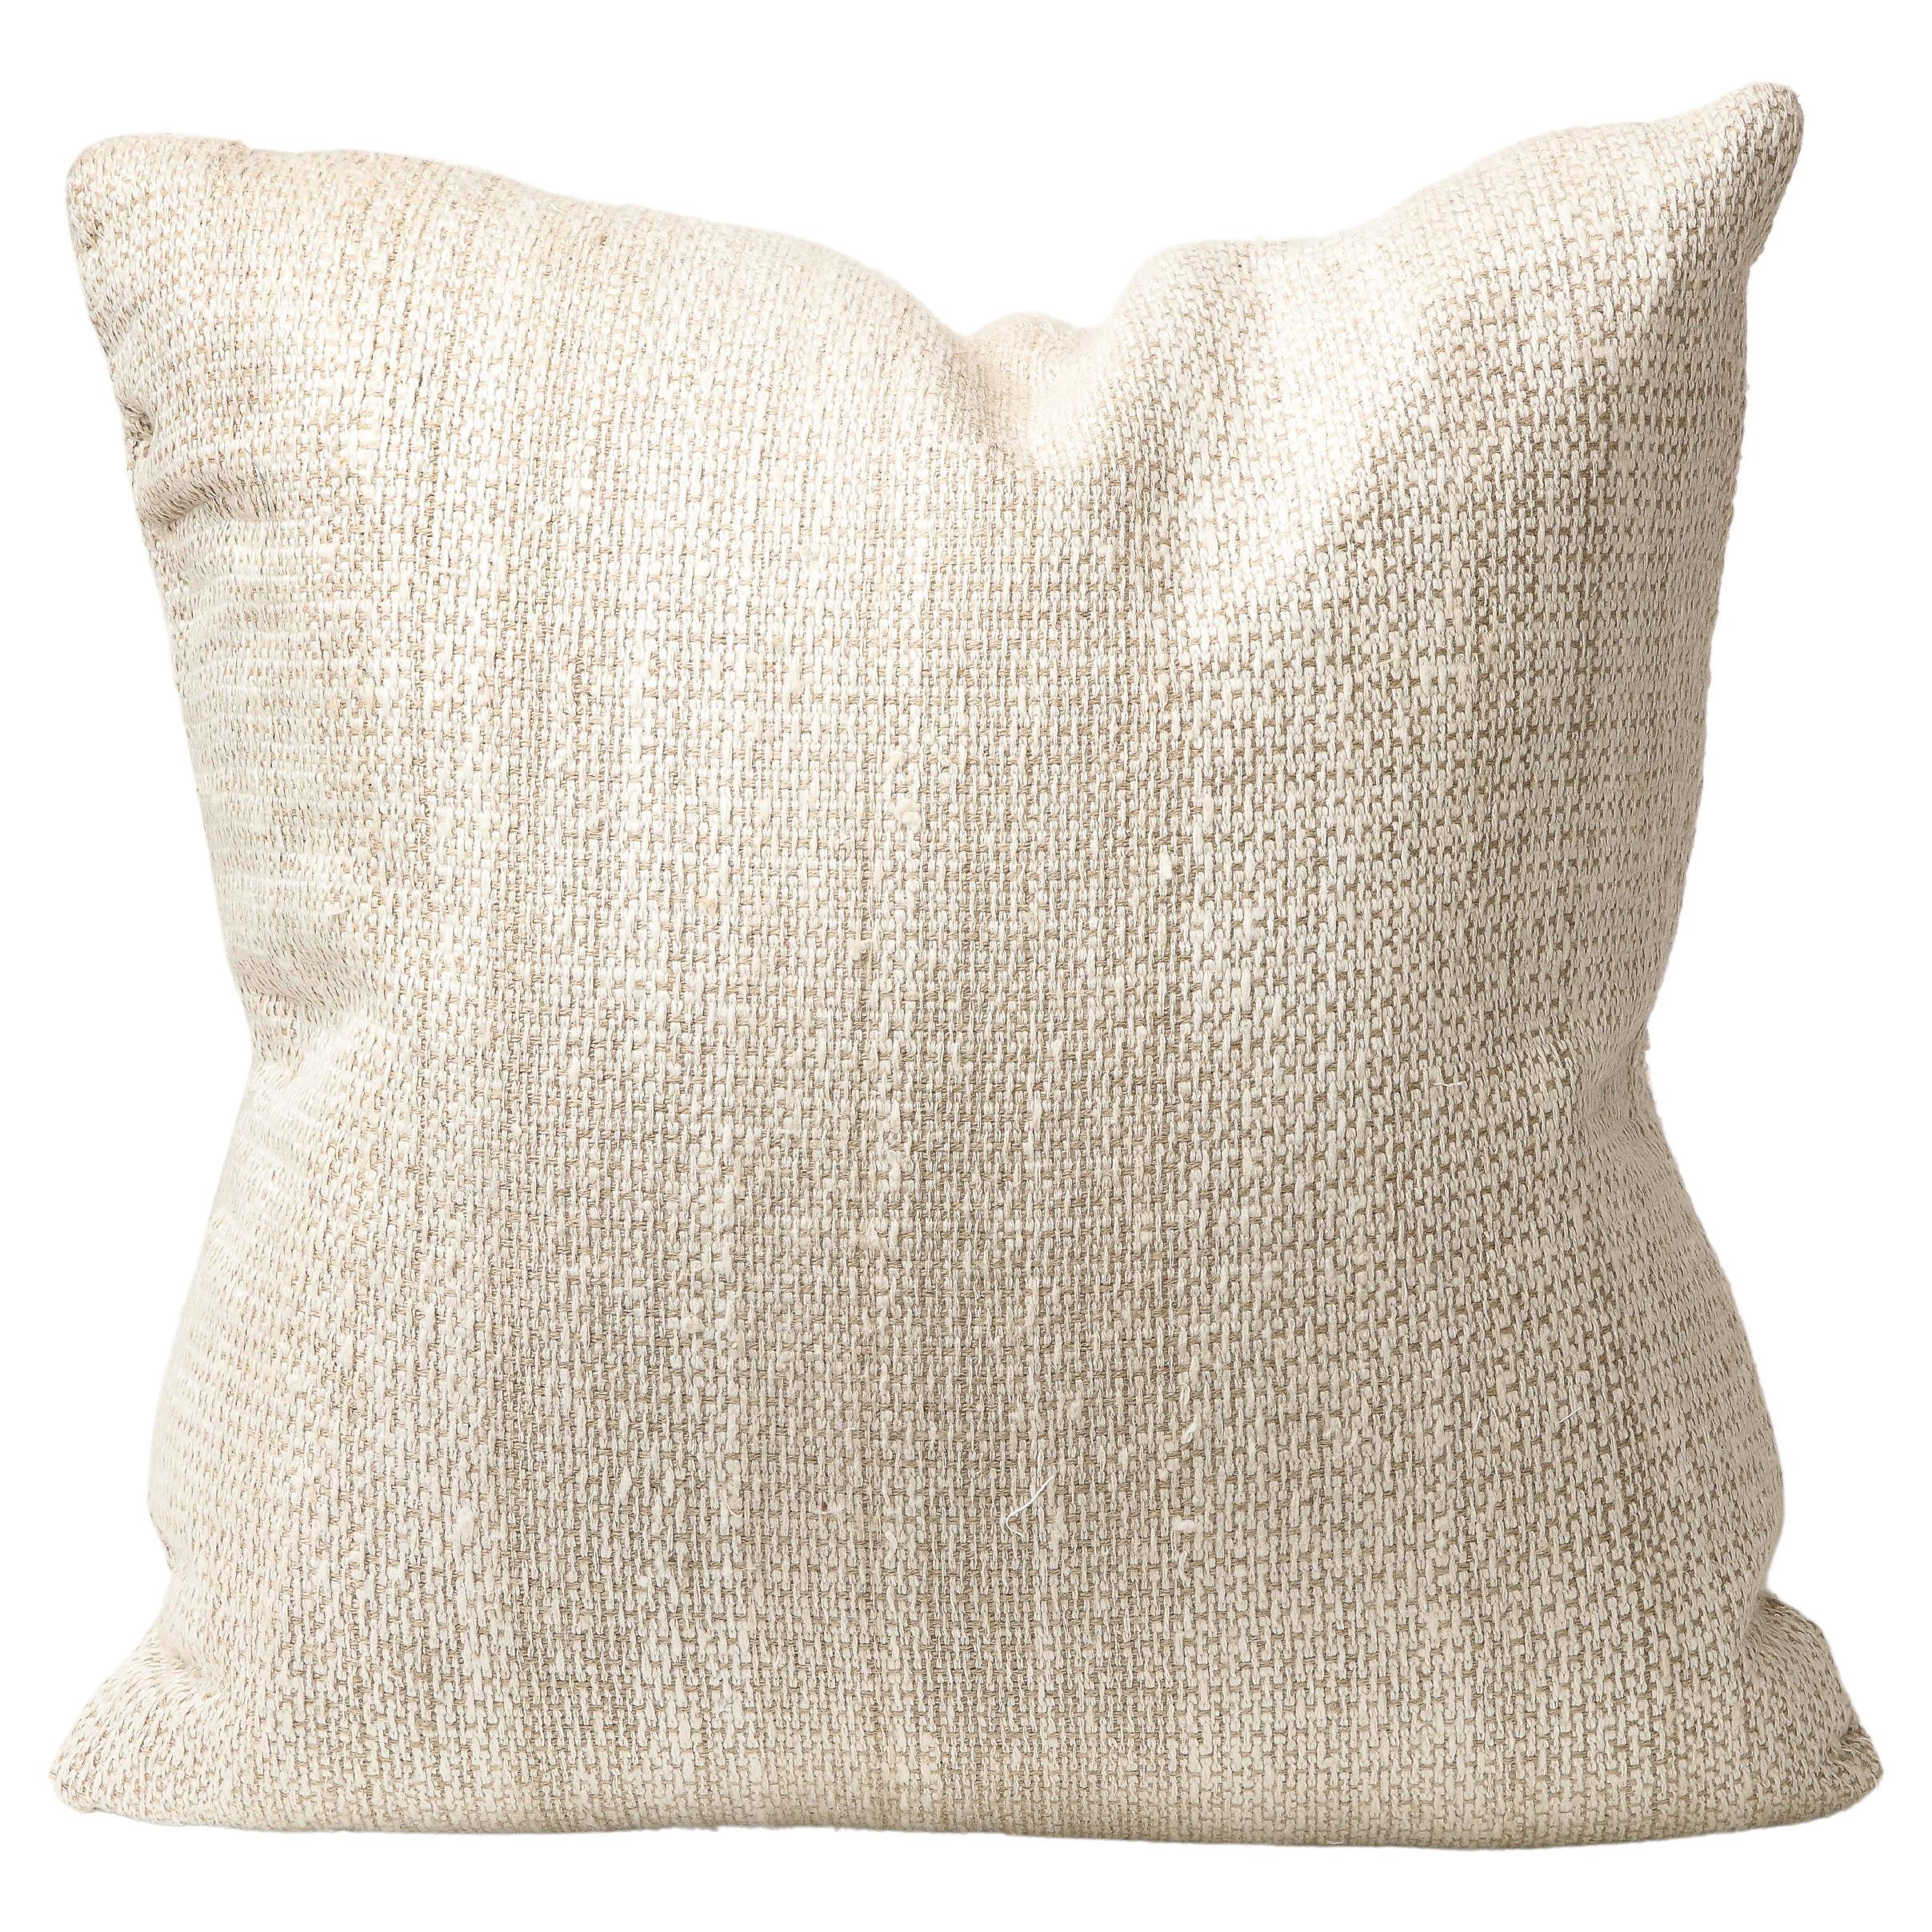 Natural Cream Woven 21" Square Pillow; Two Available For Sale